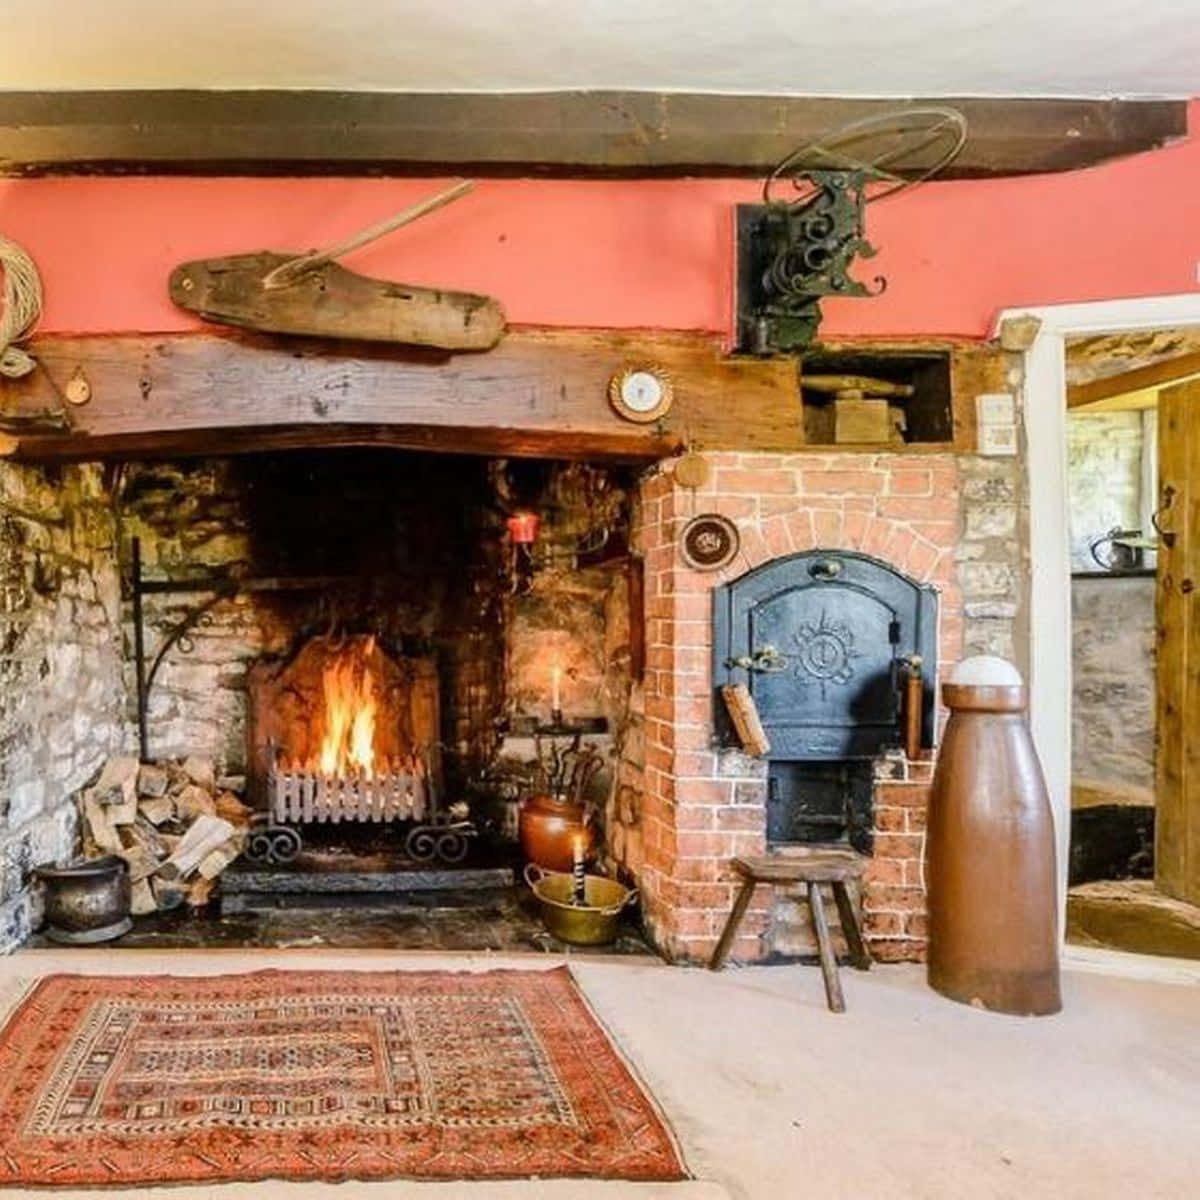 A Fireplace In A Room With A Rug And A Fireplace